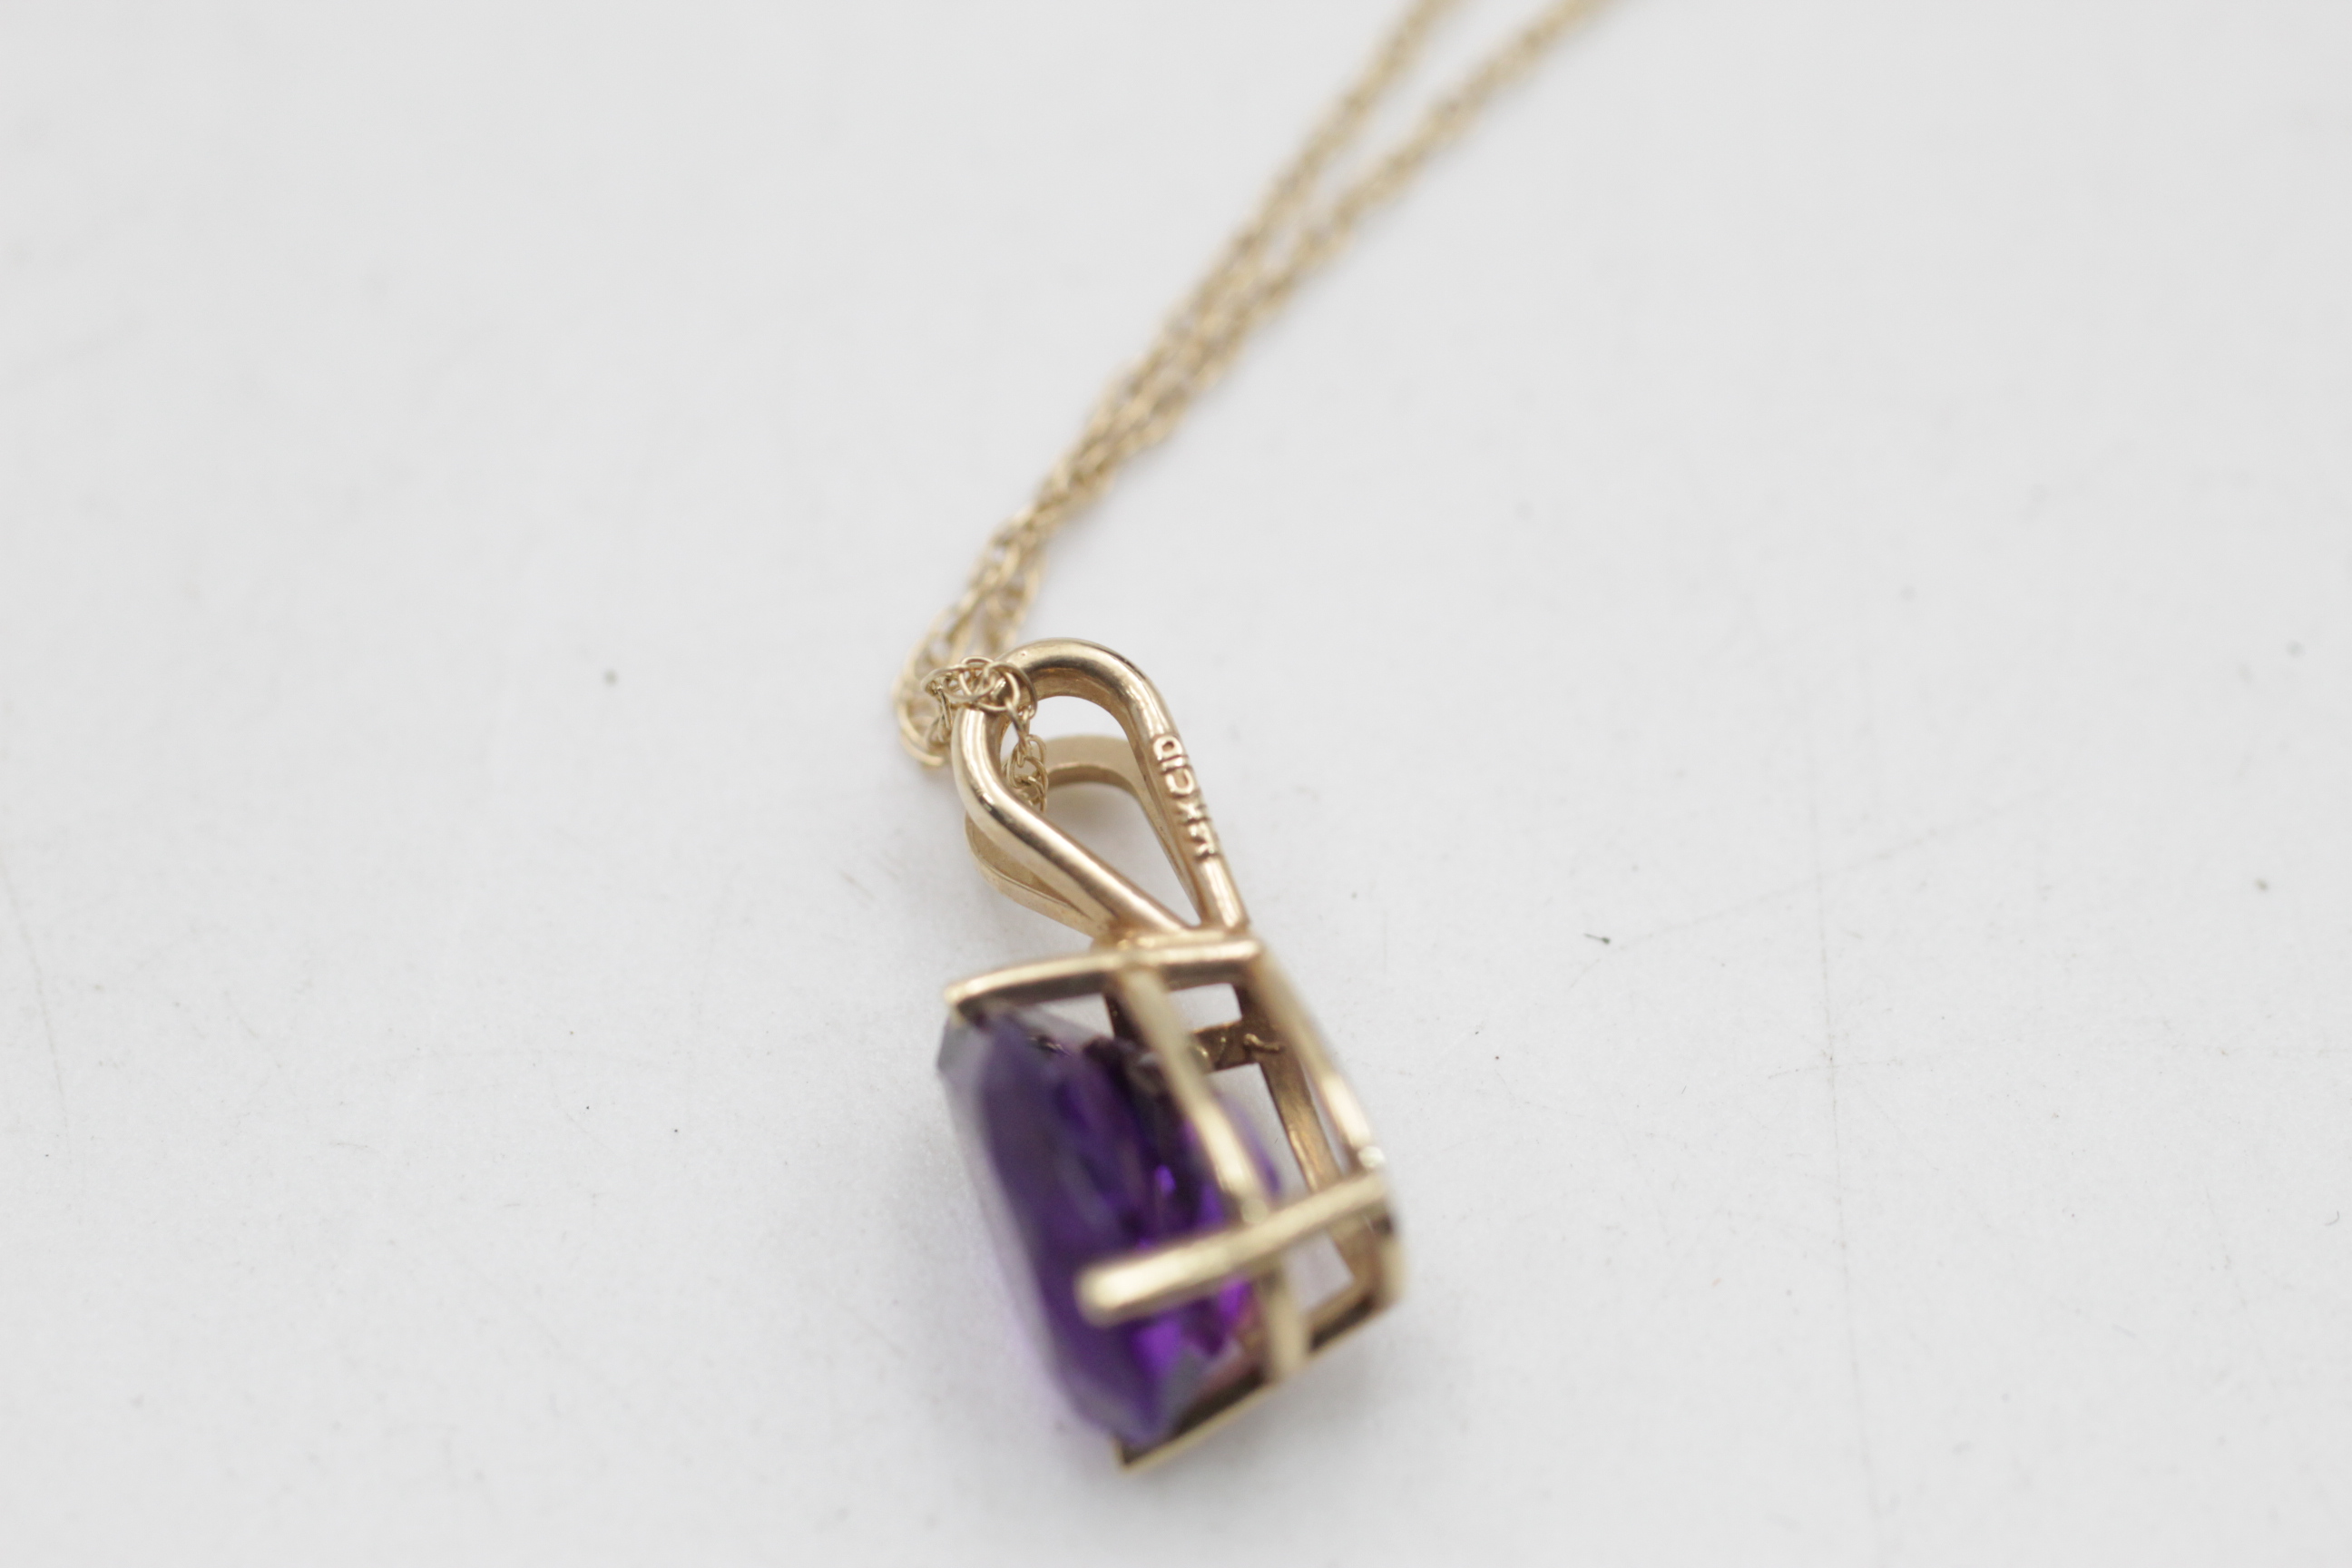 14ct gold amethyst solitaire pendant necklace (1.6g) - Image 5 of 6